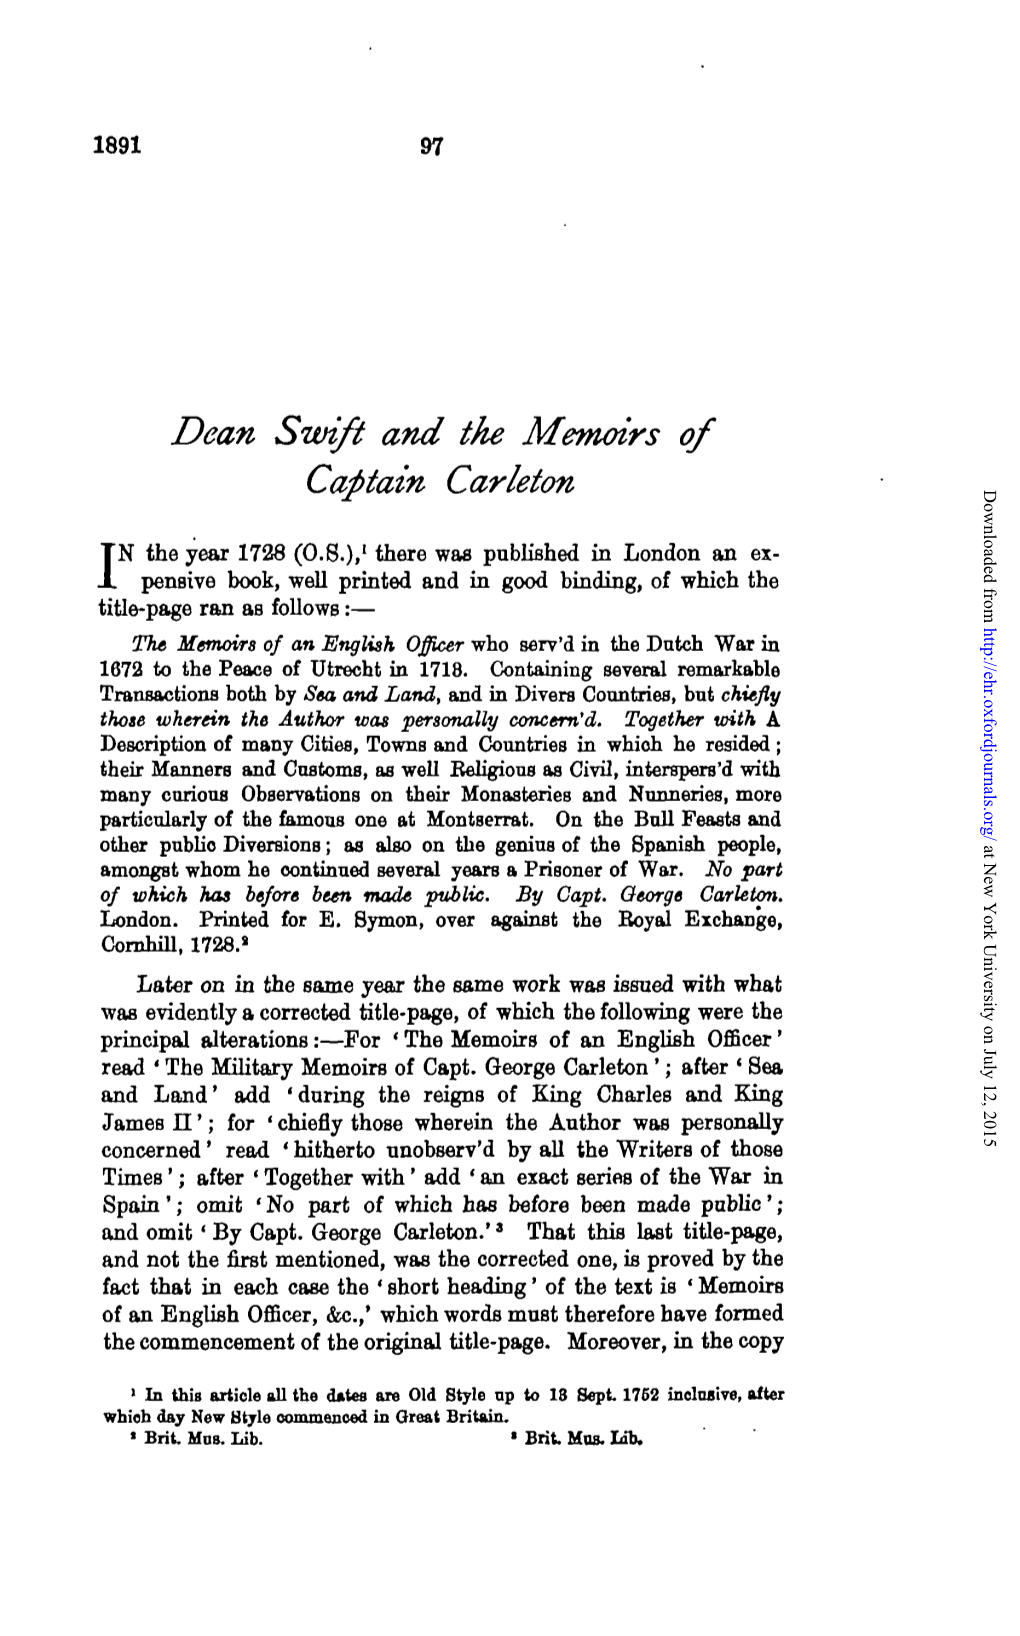 Dean Swift and the Memoirs of Captain Carleton